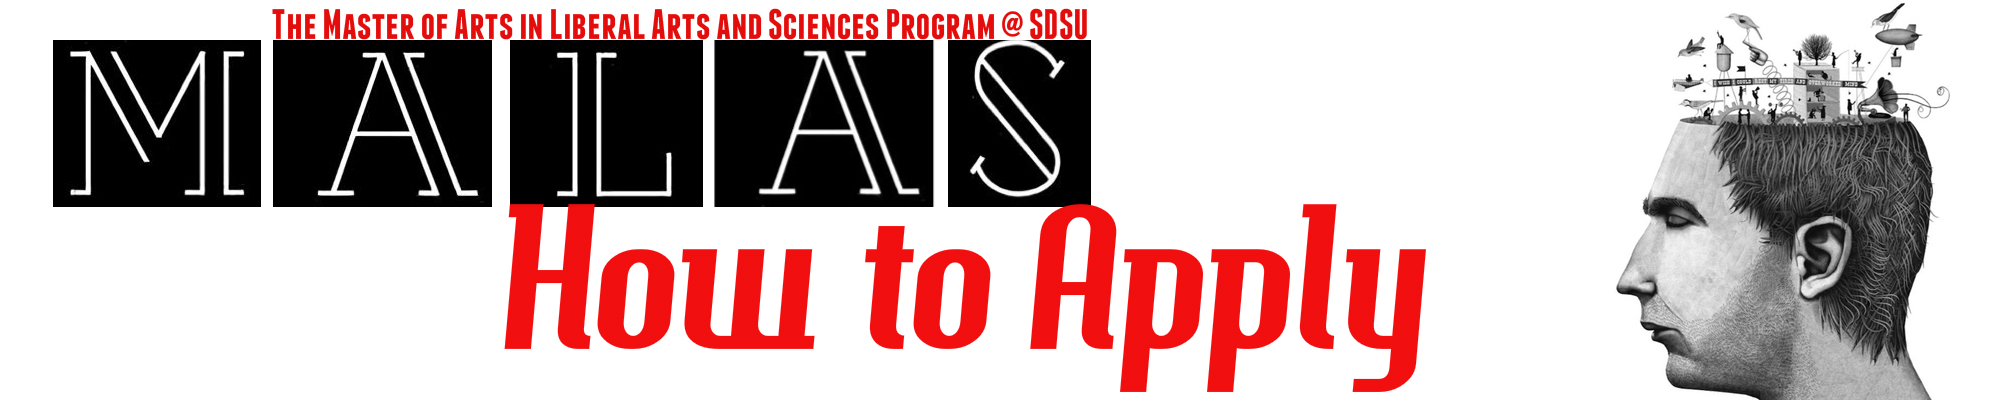 Master of Arts in Liberal Arts & Sciences (MALAS) - How to Apply